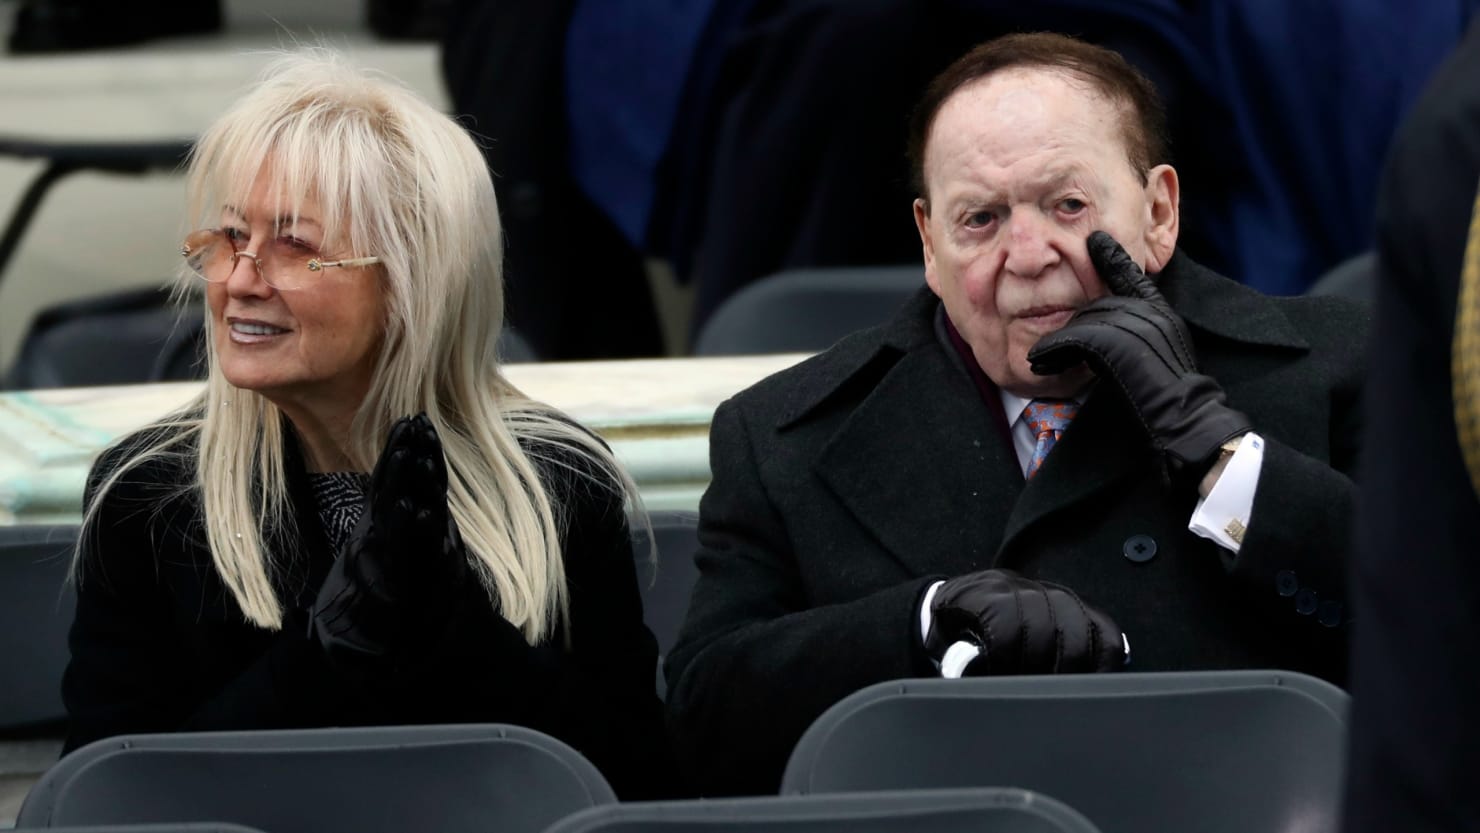 Revealing the Prophet Miriam O. Adelson: The Journey of a Billionaire